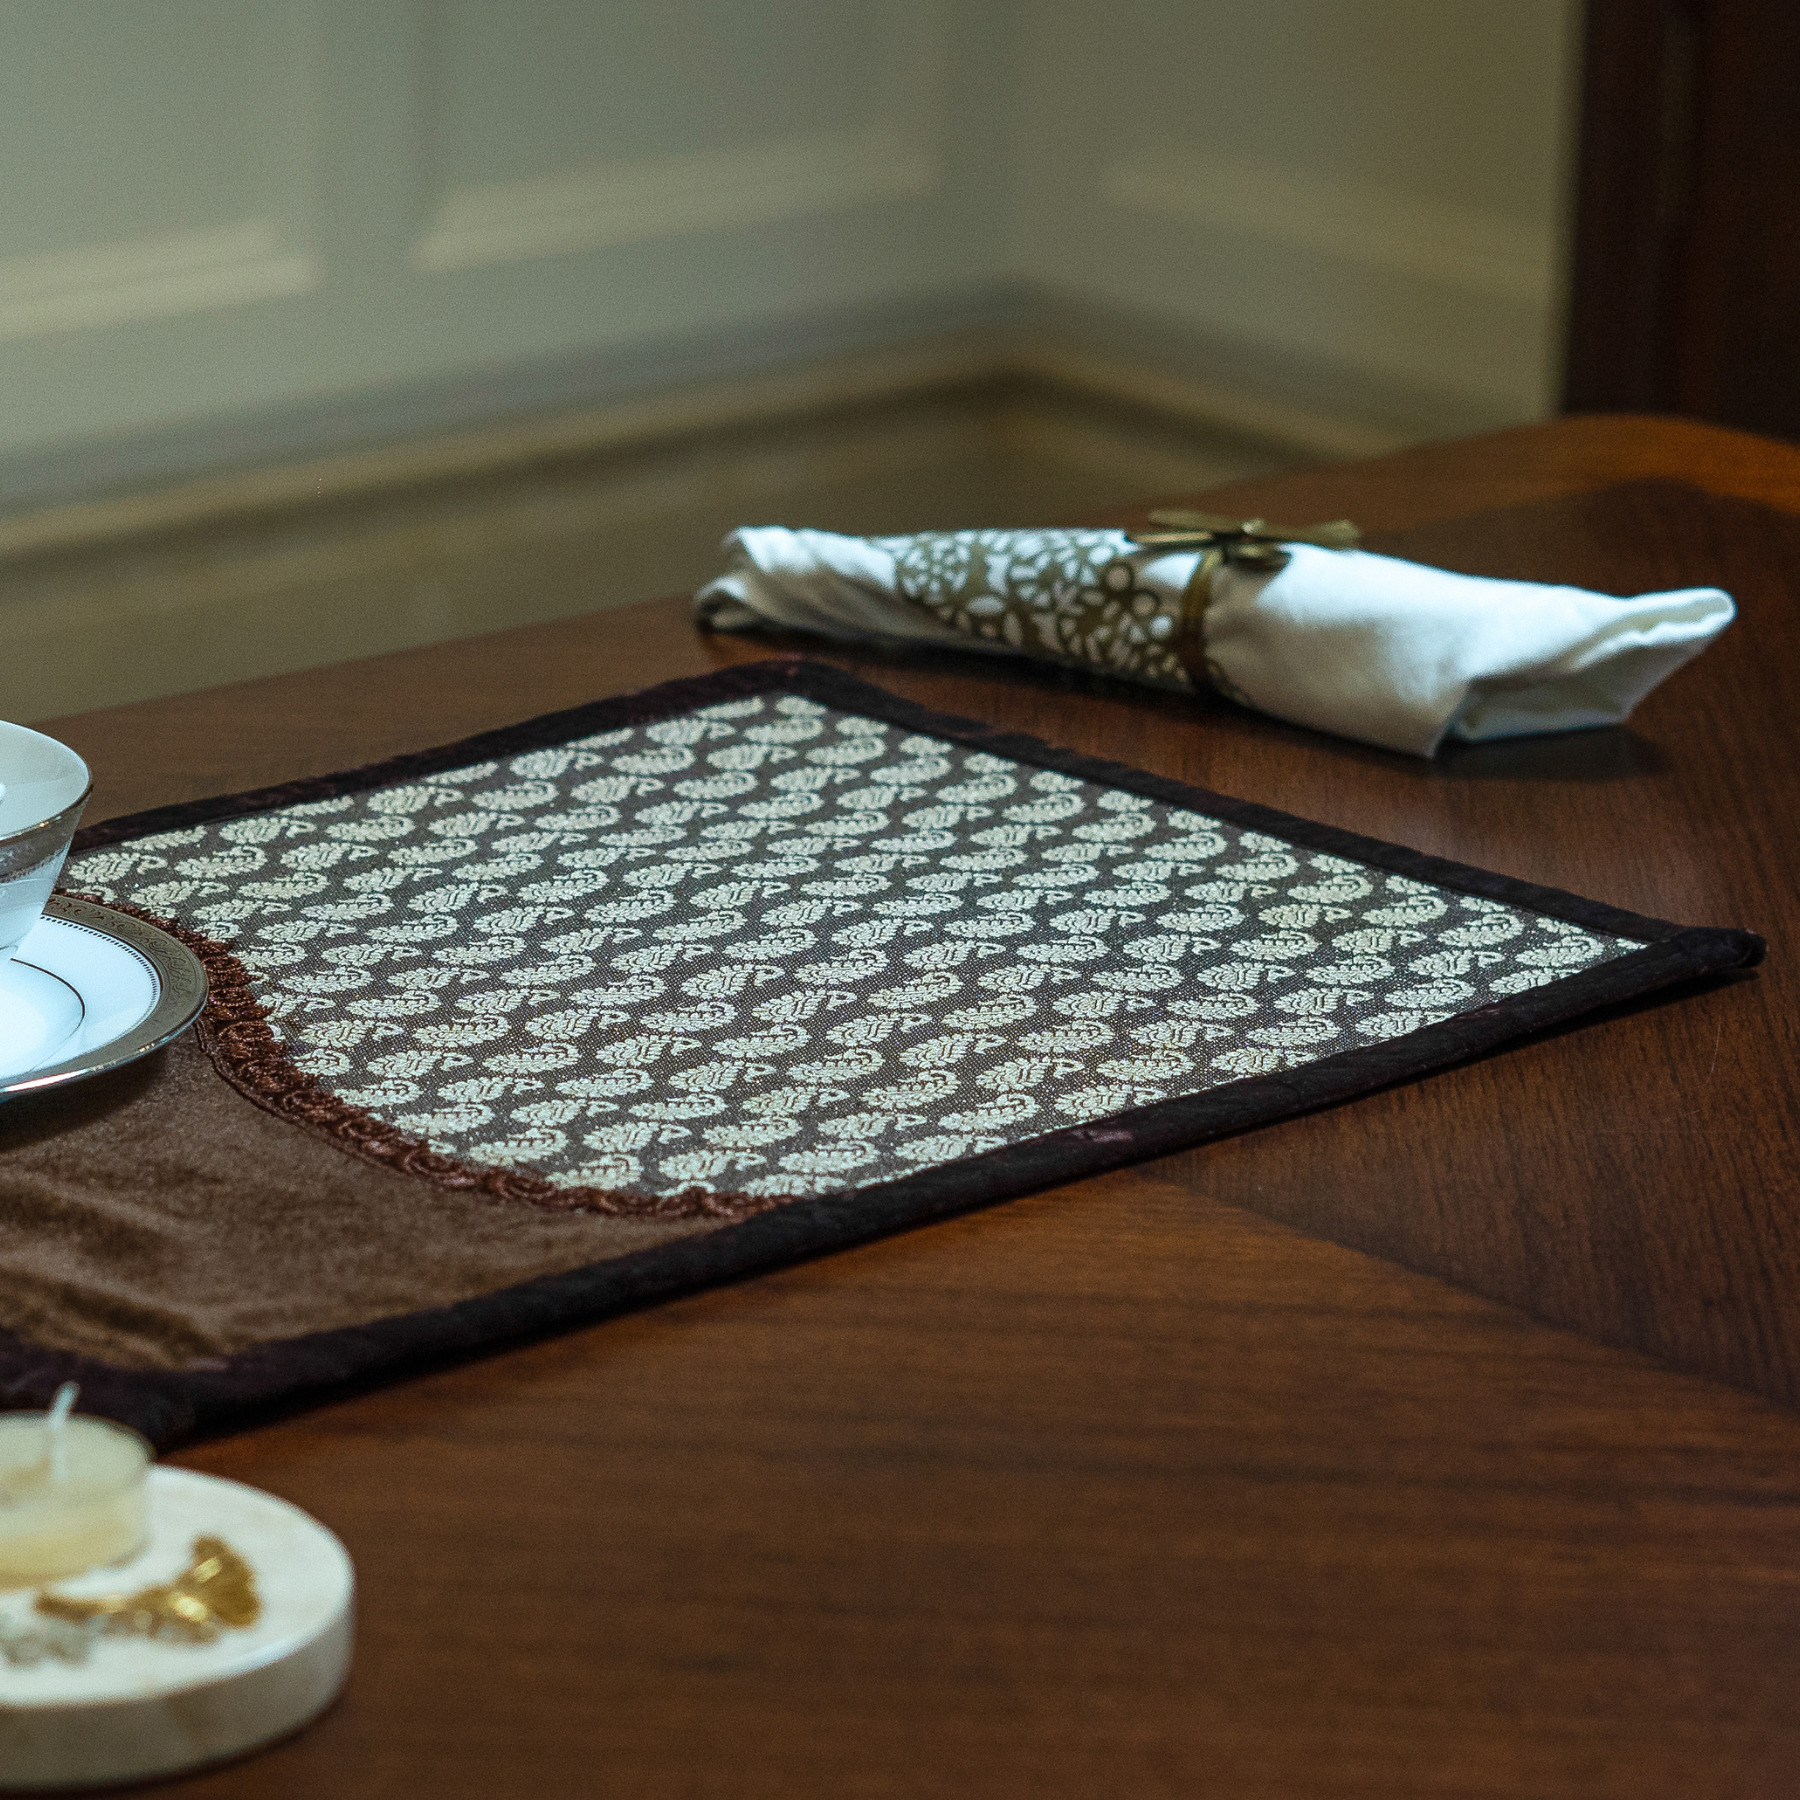 The Luxelife Noir Placemats